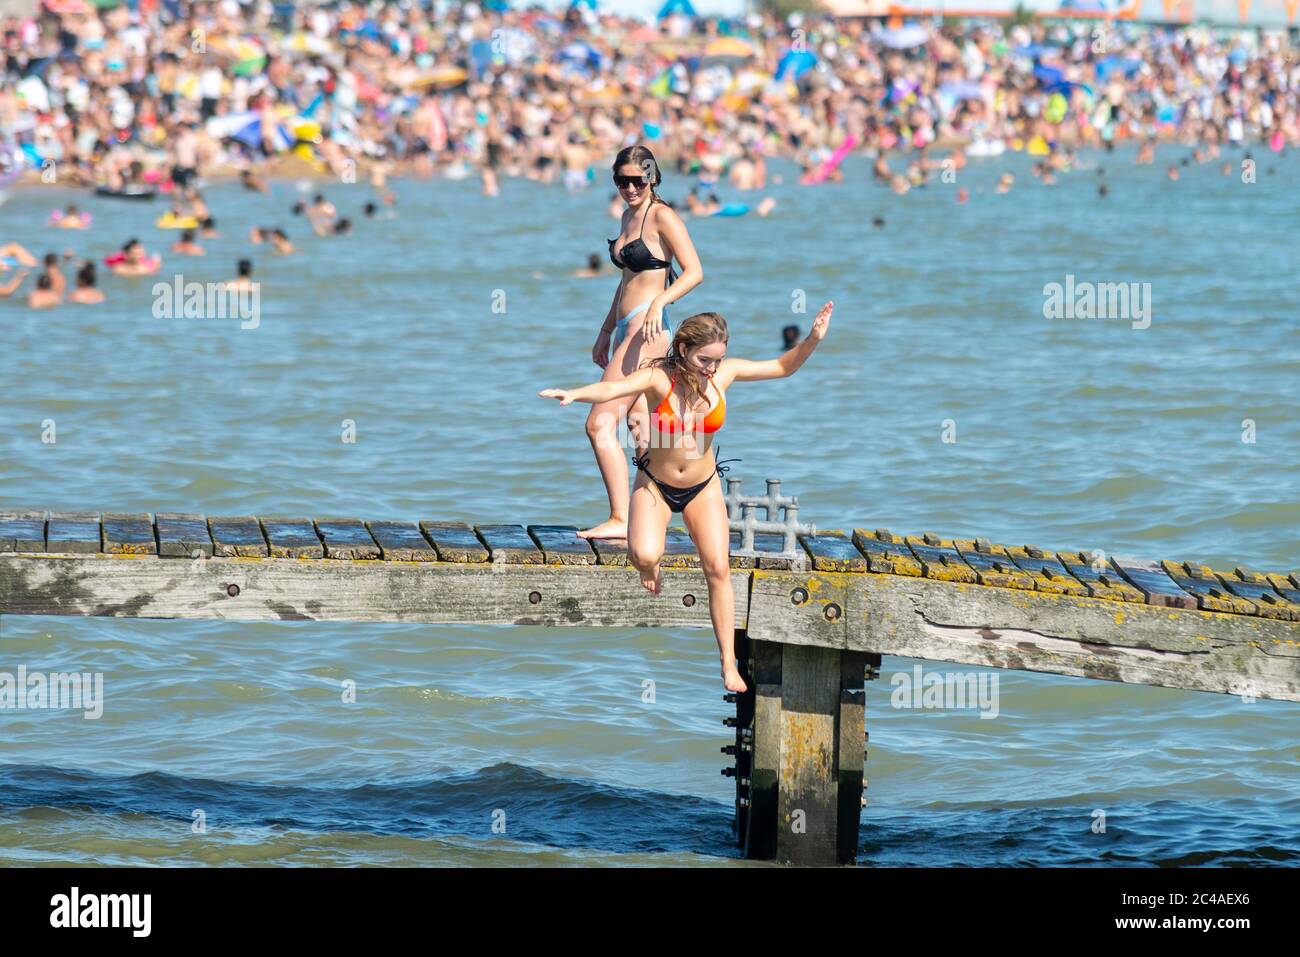 Southend on Sea, Essex, UK. 25th Jun, 2020. With the forecast record temperatures for 2020 people are heading to the seafront to cool down, despite the COVID-19 Coronavirus advice. In Southend on Sea the shore of the Thames Estuary is packed, with people swimming and jumping into the sea. Young white Caucasian female jumping into the sea Stock Photo